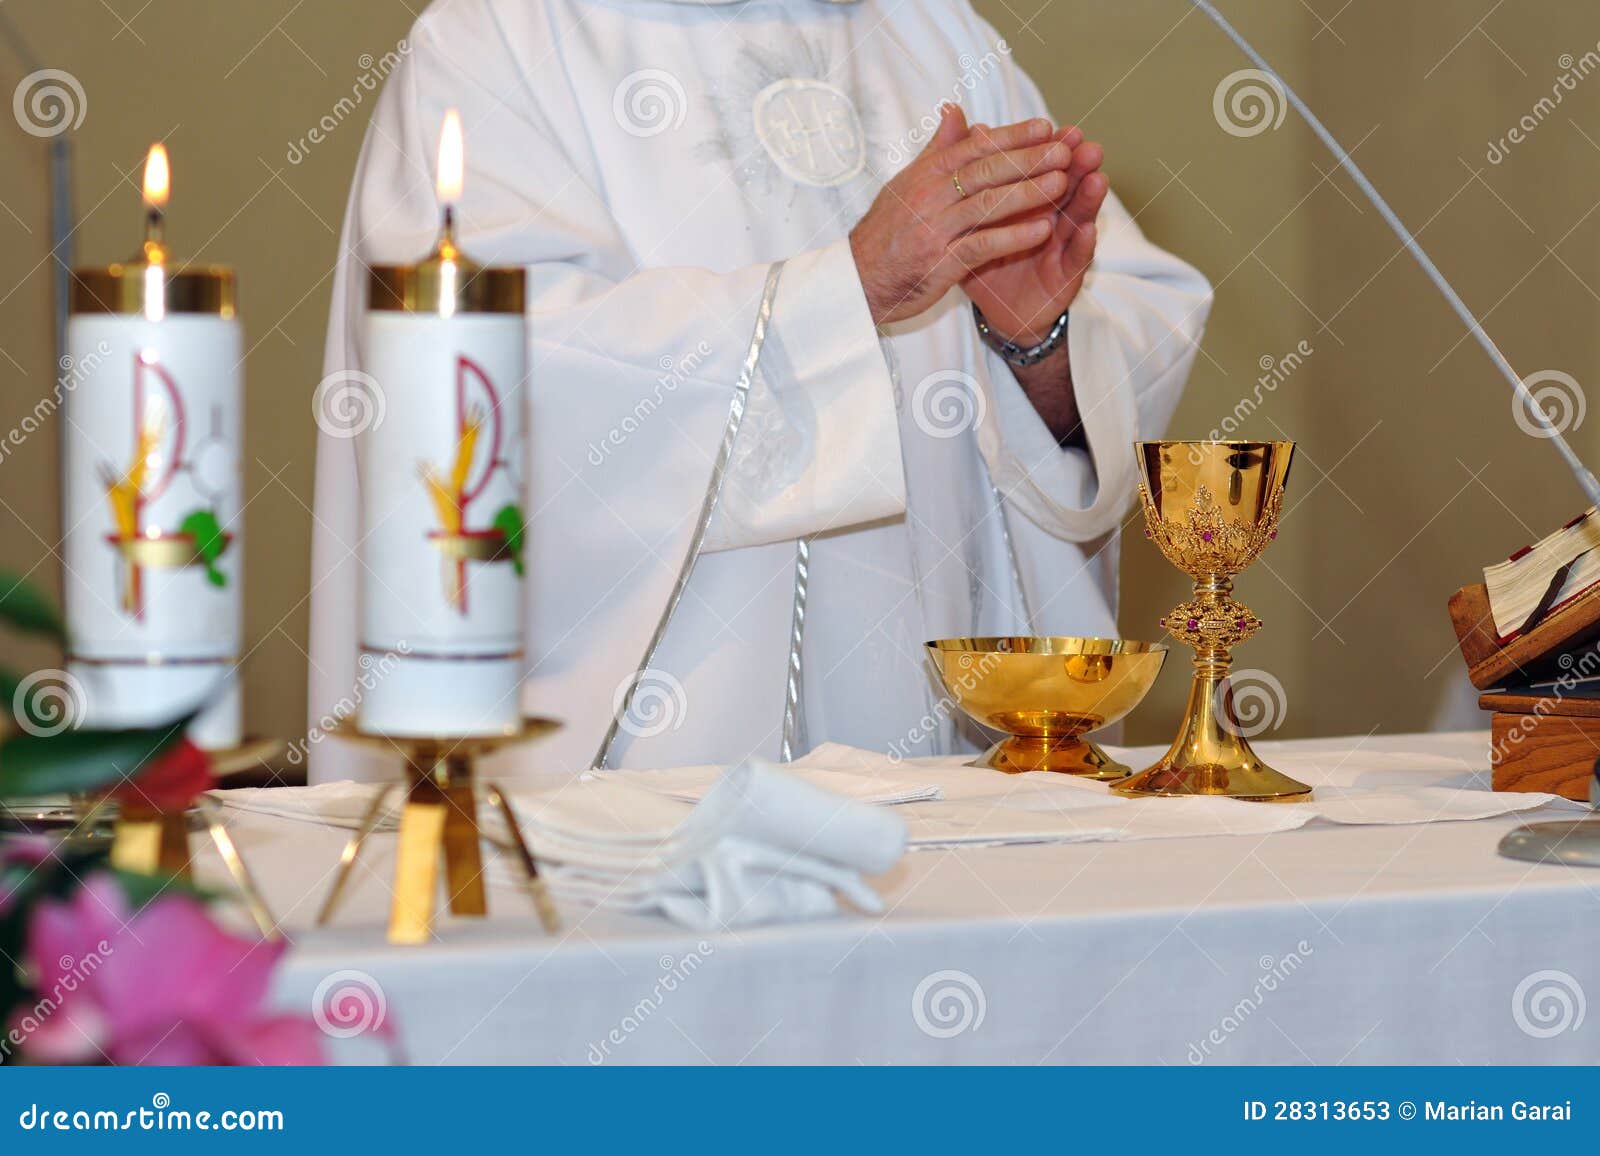 chalice on the altar for worship